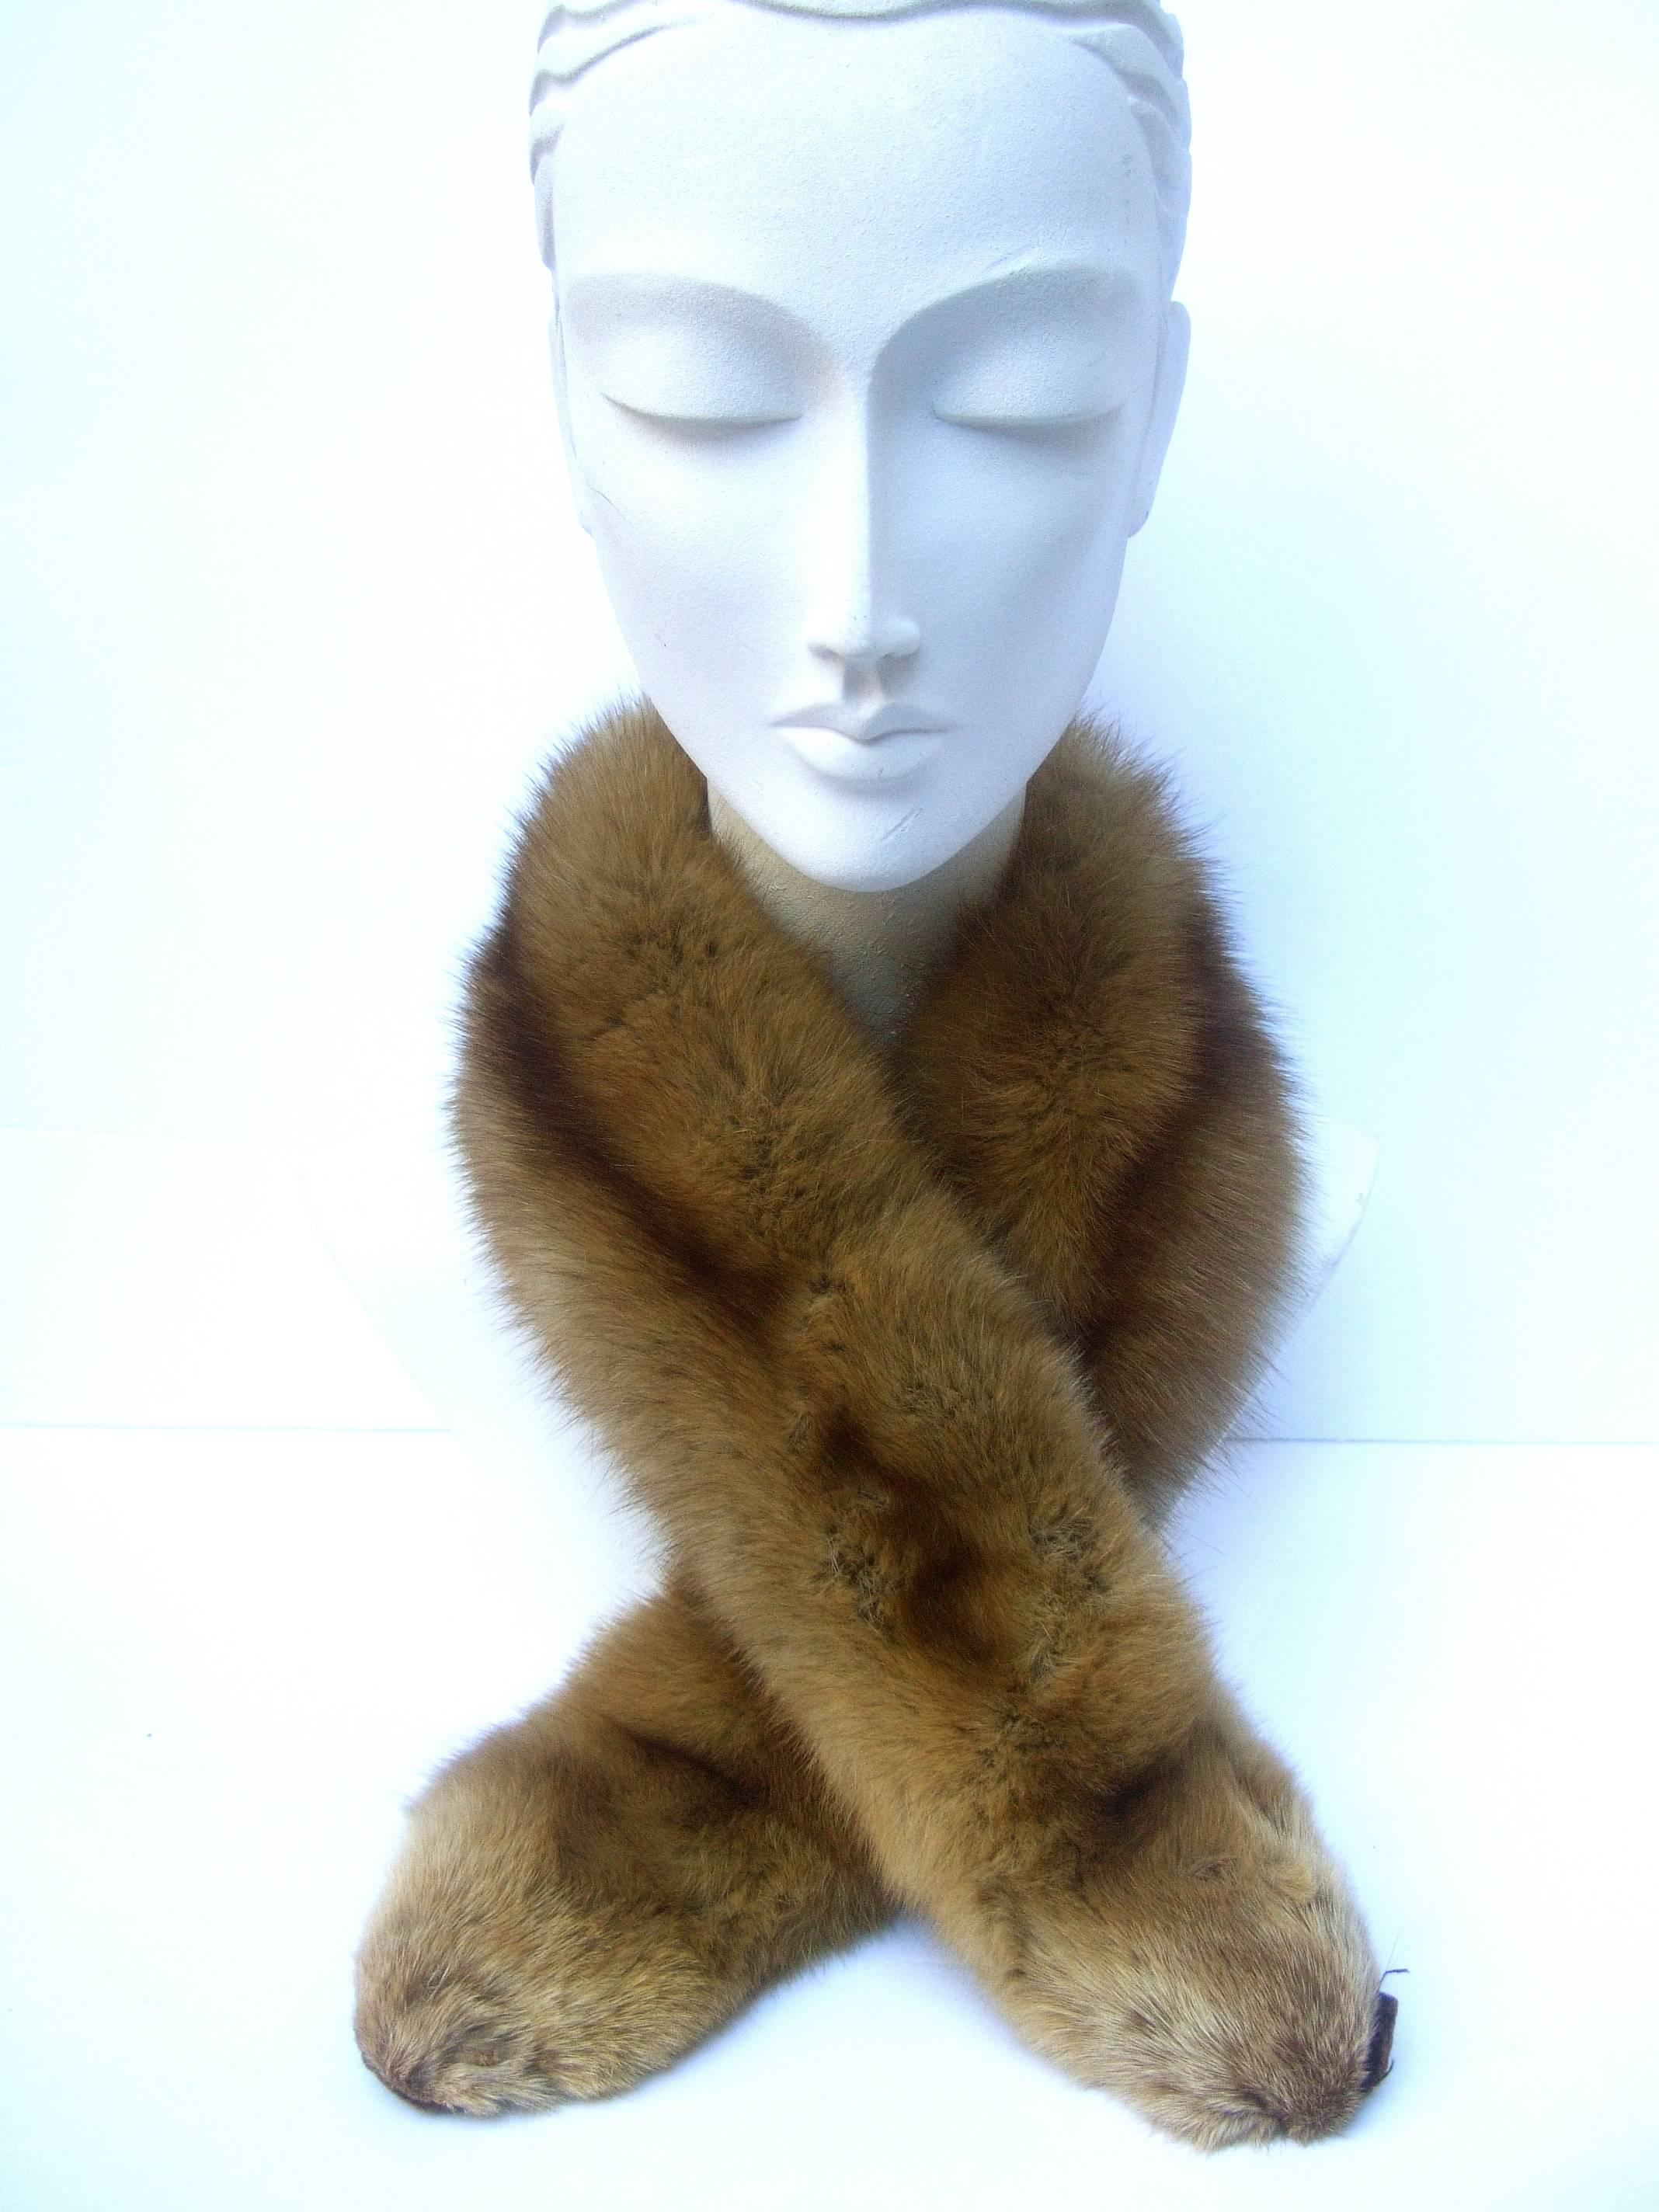 Luxurious plush sable fur collar ca 1960s
The elegant sable fur is light & fluffy
Running down the center is a darker 
brown streak of sable fur 

Makes an elegant accessory wrapped 
around the neck or draped over the
shoulder lapels  

Lined in